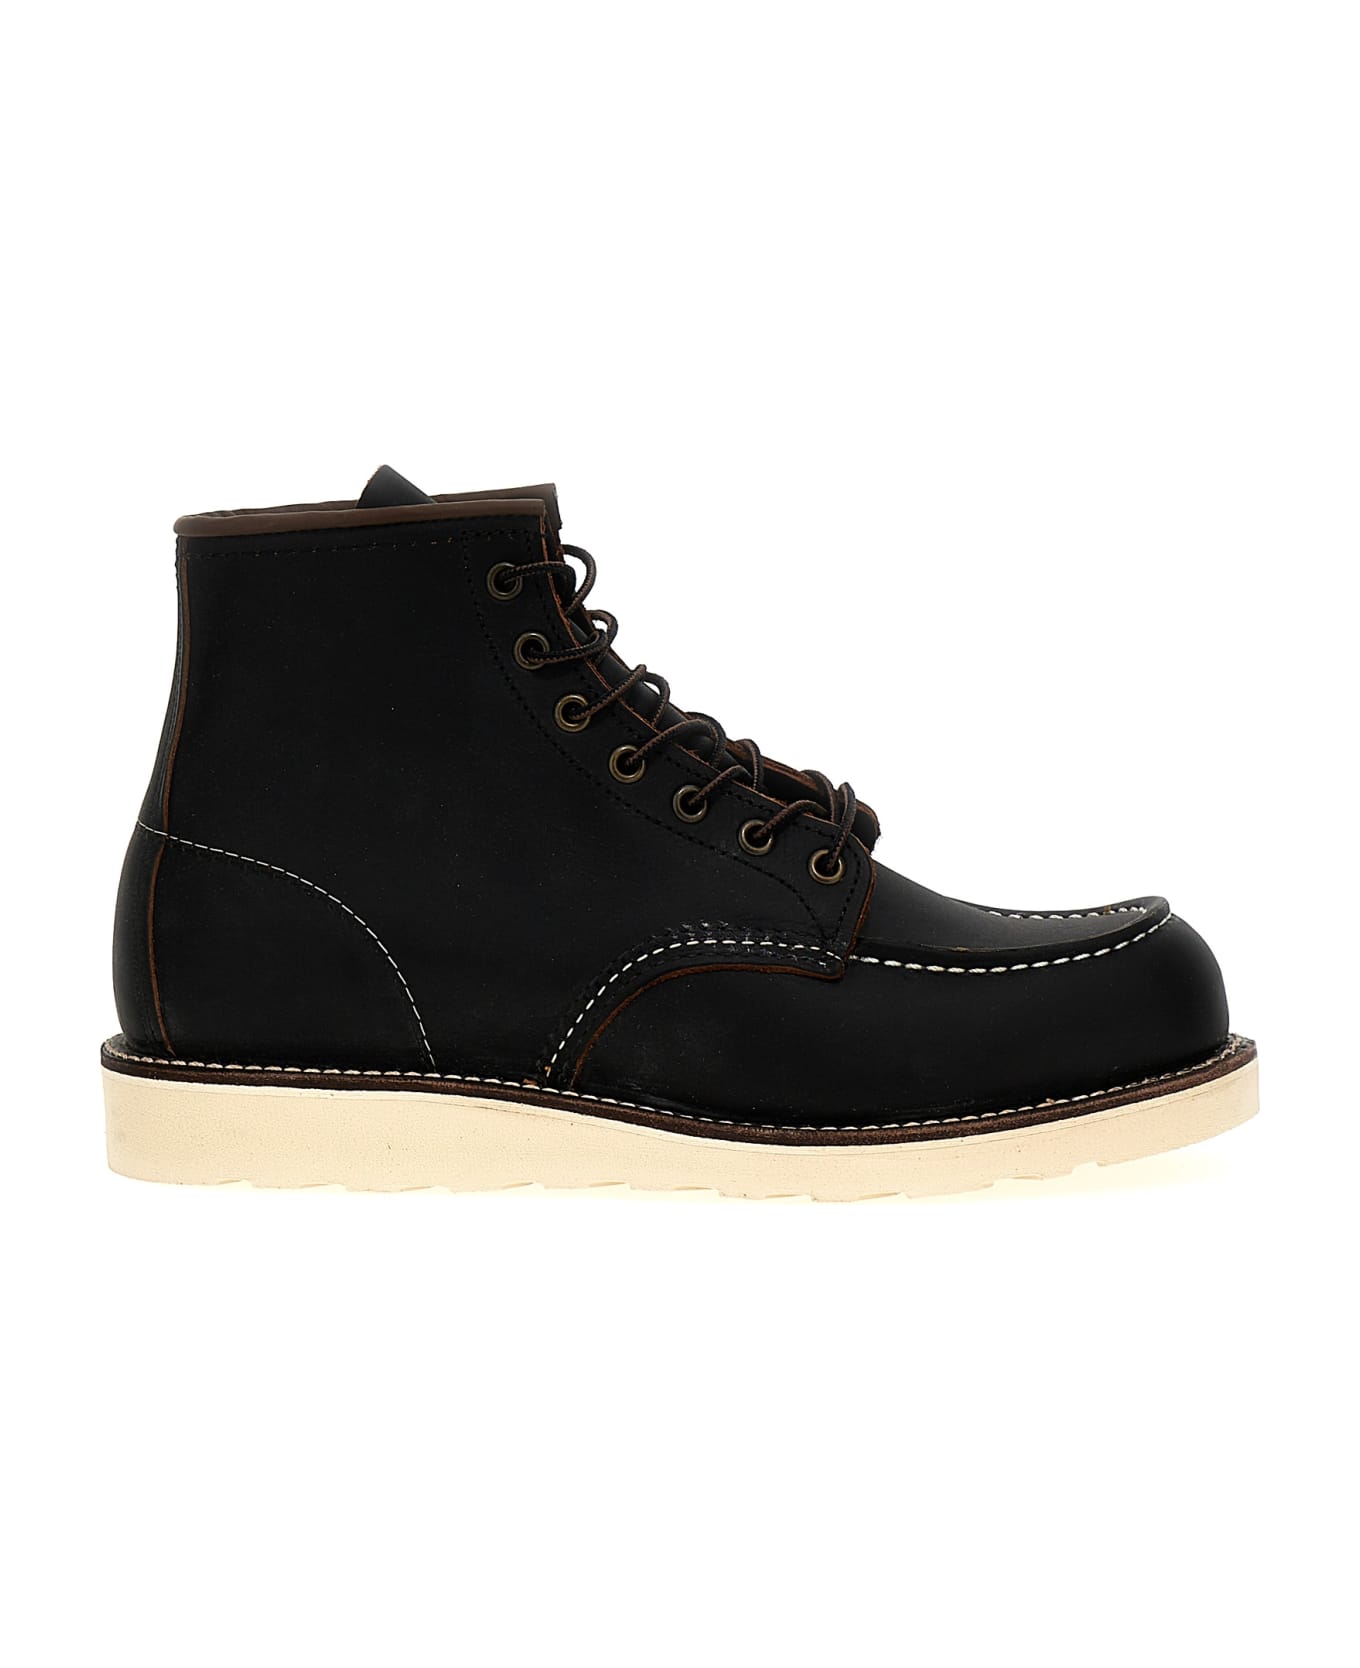 Red Wing 'classic Moc' Ankle Boots - Black   ブーツ